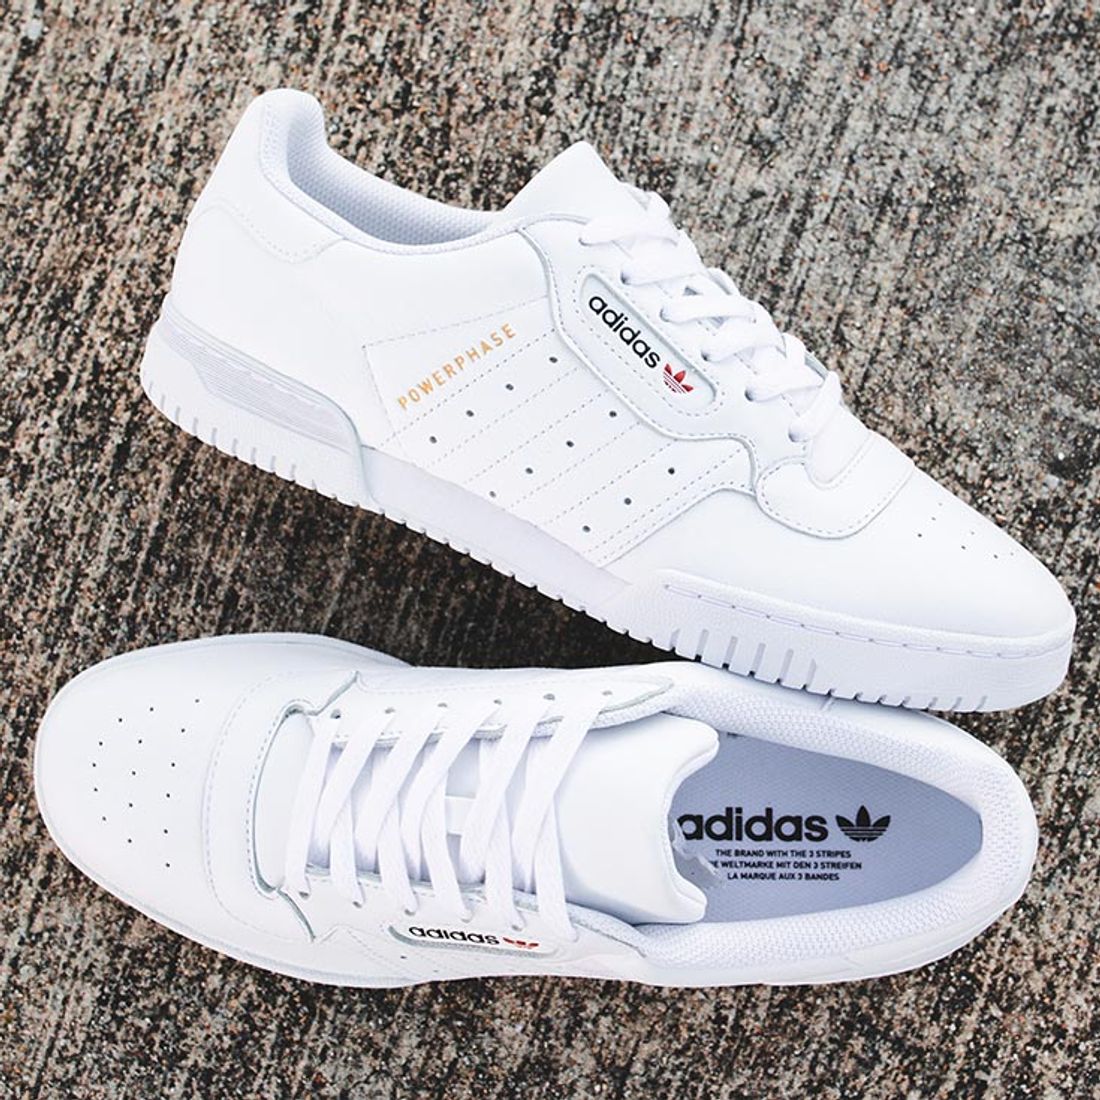 Autor Ministro precedente JD Sports Have a Stronghold on the adidas Powerphase - Sneaker Freaker